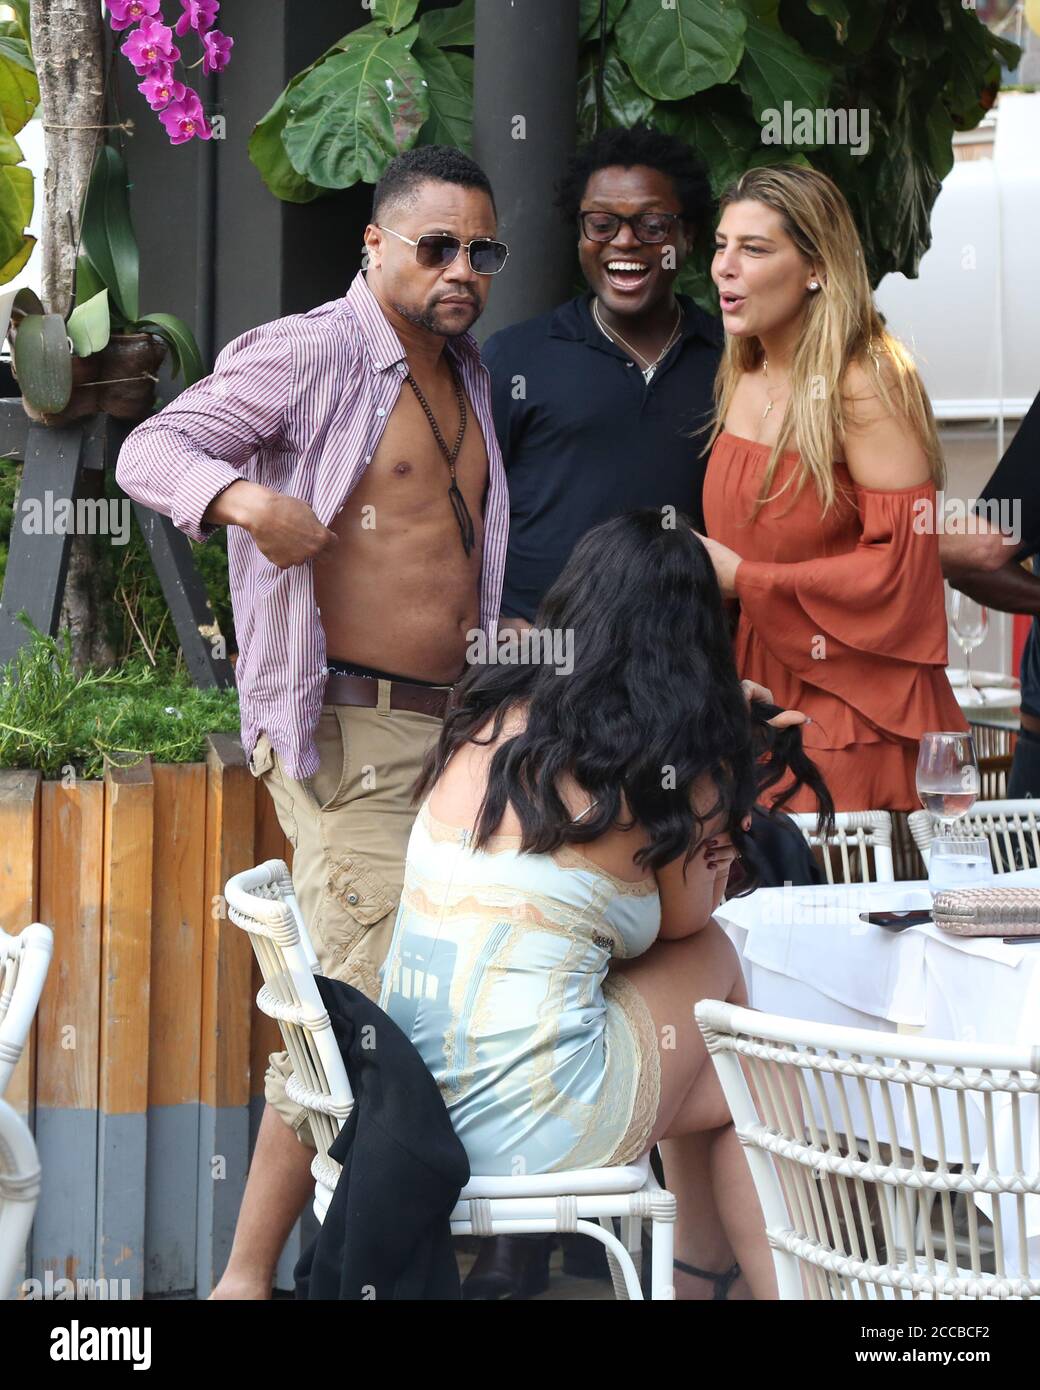 Miami, United States Of America. 17th Mar, 2019. MIAMI GARDENS, FL - MARCH 17: Robert De Niro's son's estranged wife is 'hooking up' with Cuba Gooding Jr. as seen at Seaspice Resaurant on March 17, 2019 in Miami, Florida. People: Cuba Gooding Jr Credit: Storms Media Group/Alamy Live News Stock Photo